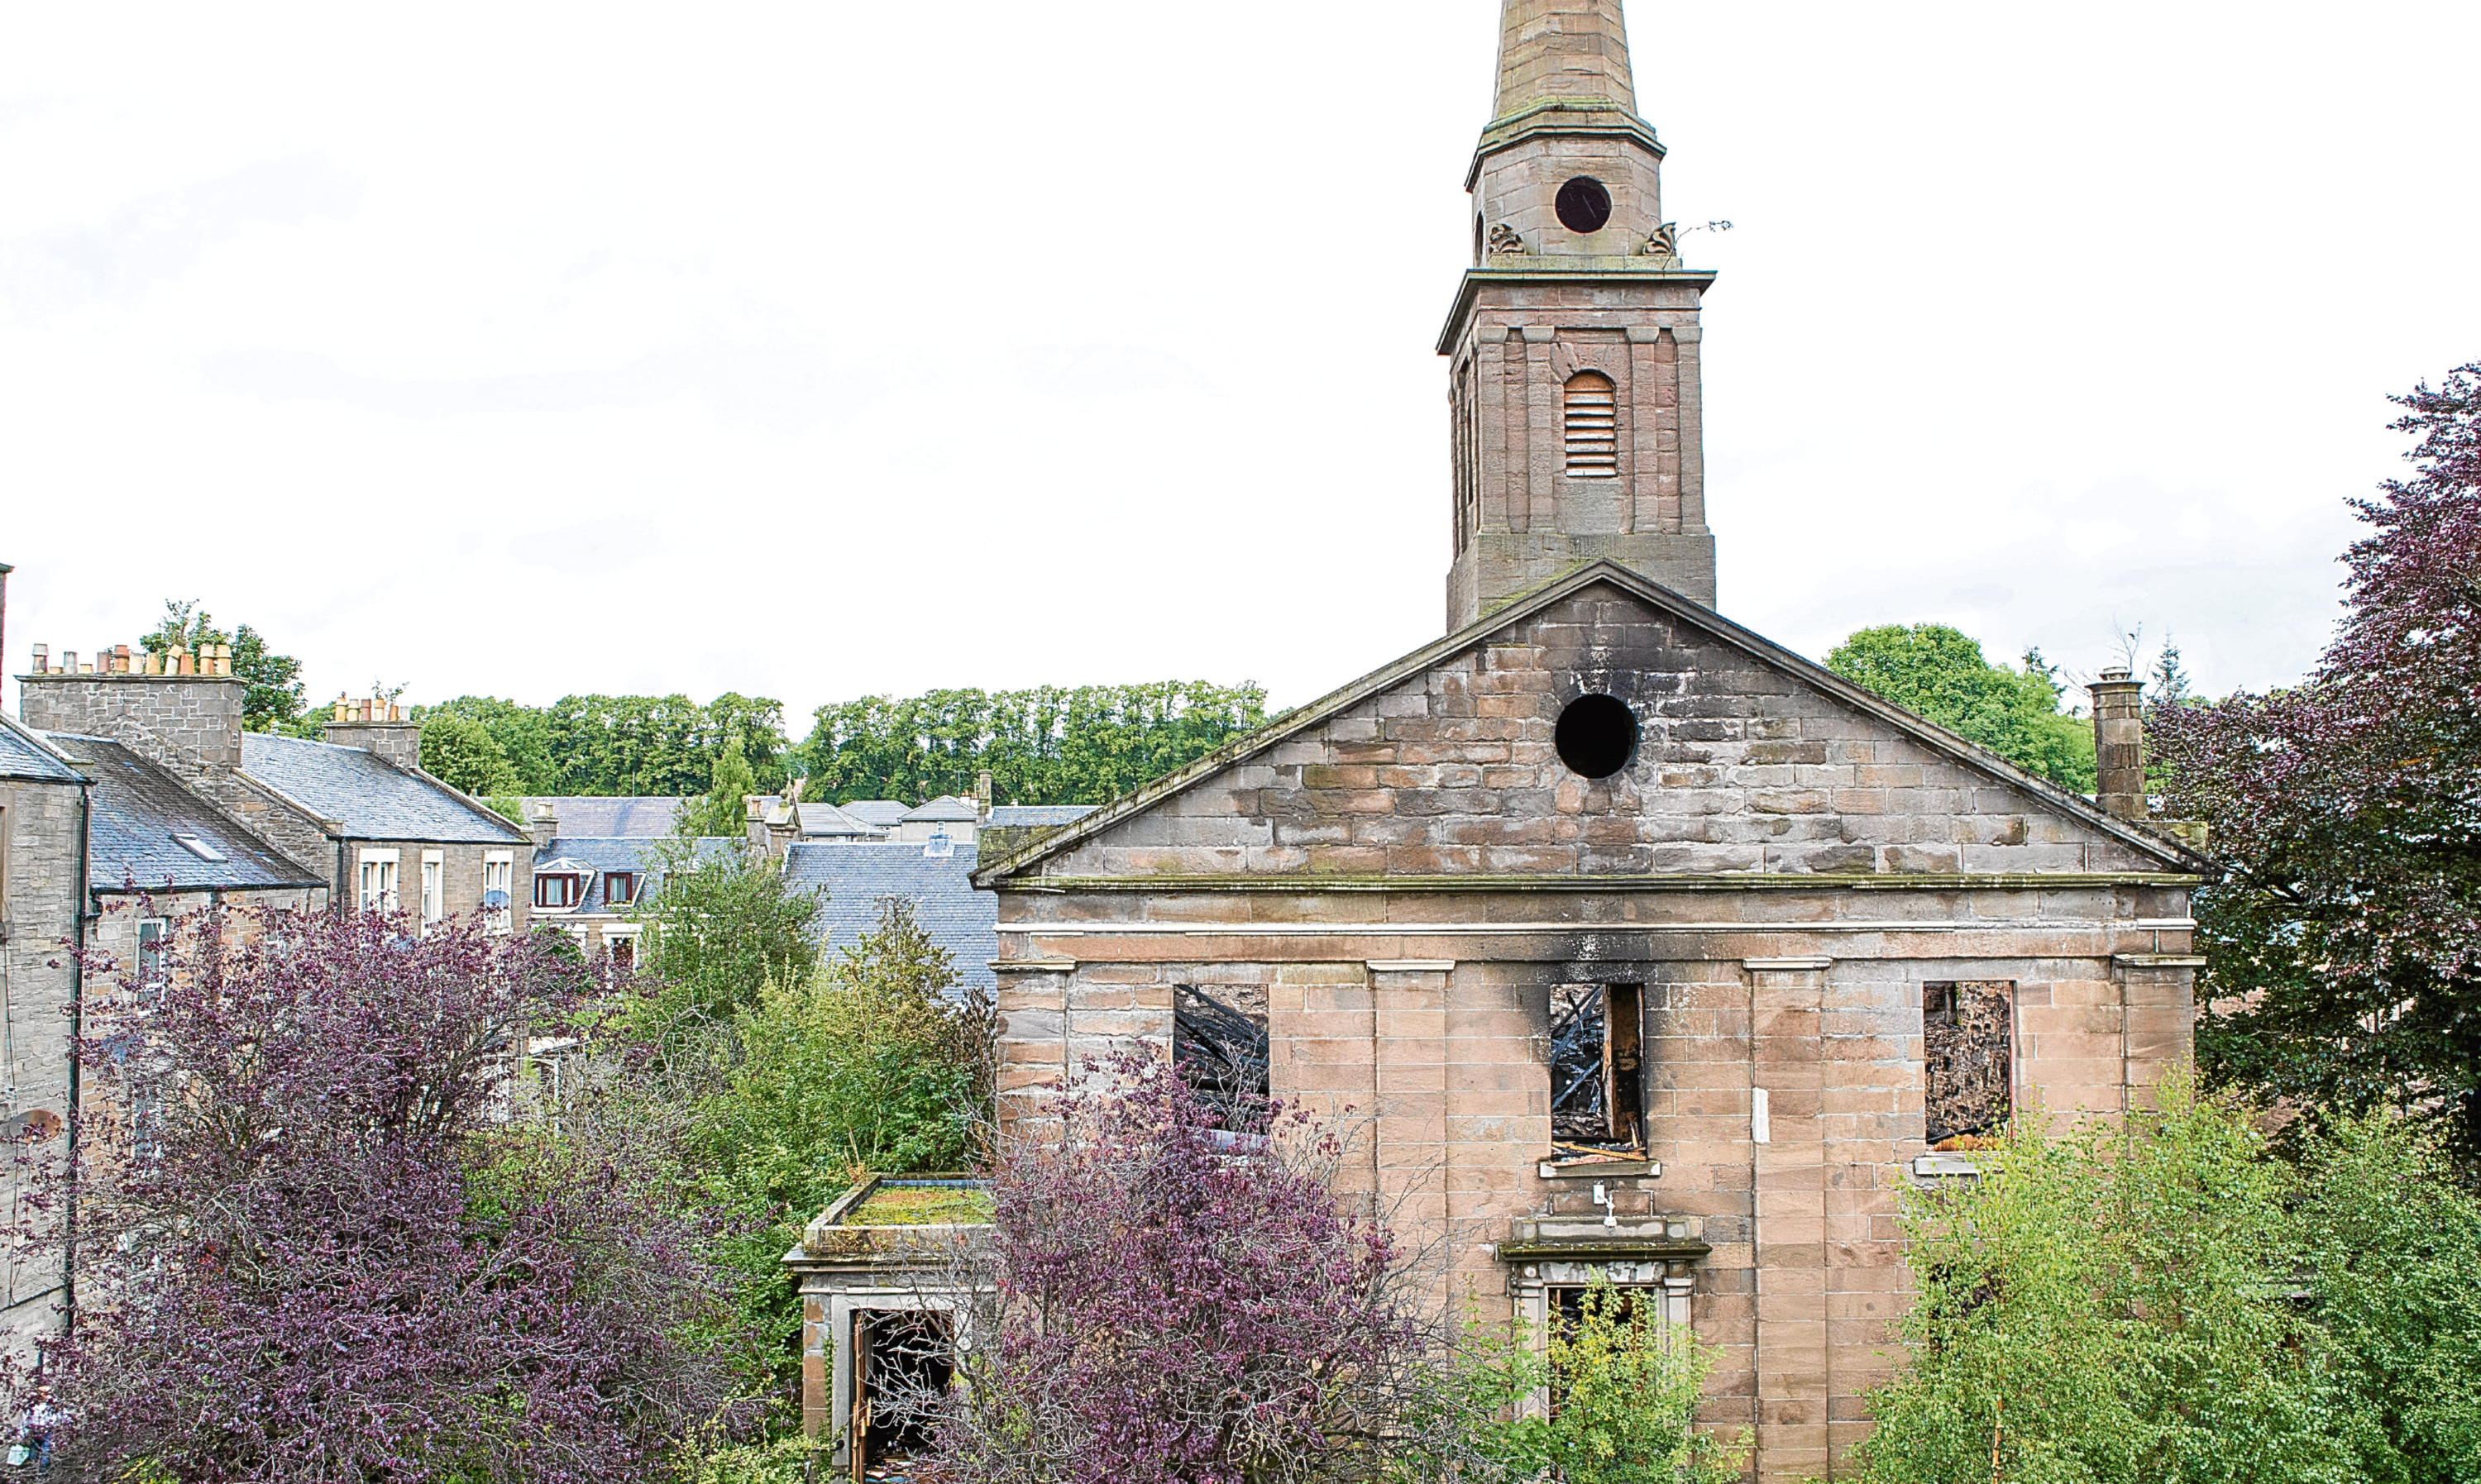 The fire-damaged Lochee church which housed several congregations over the years.